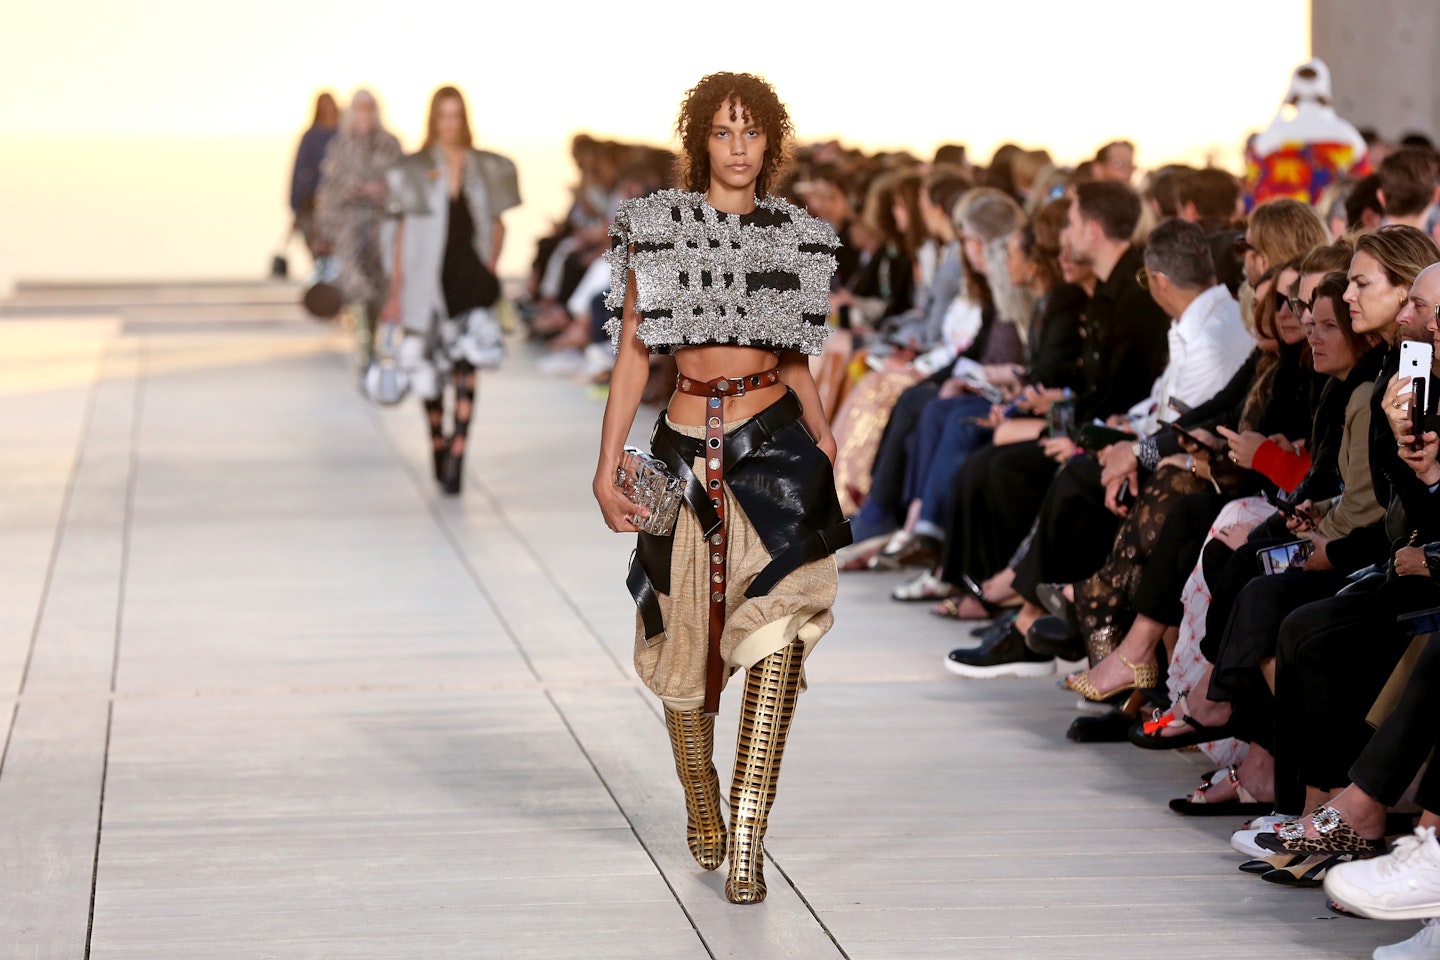 Louis Vuitton's Cruise Show Featured a Lot of Neoprene - Go Fug Yourself